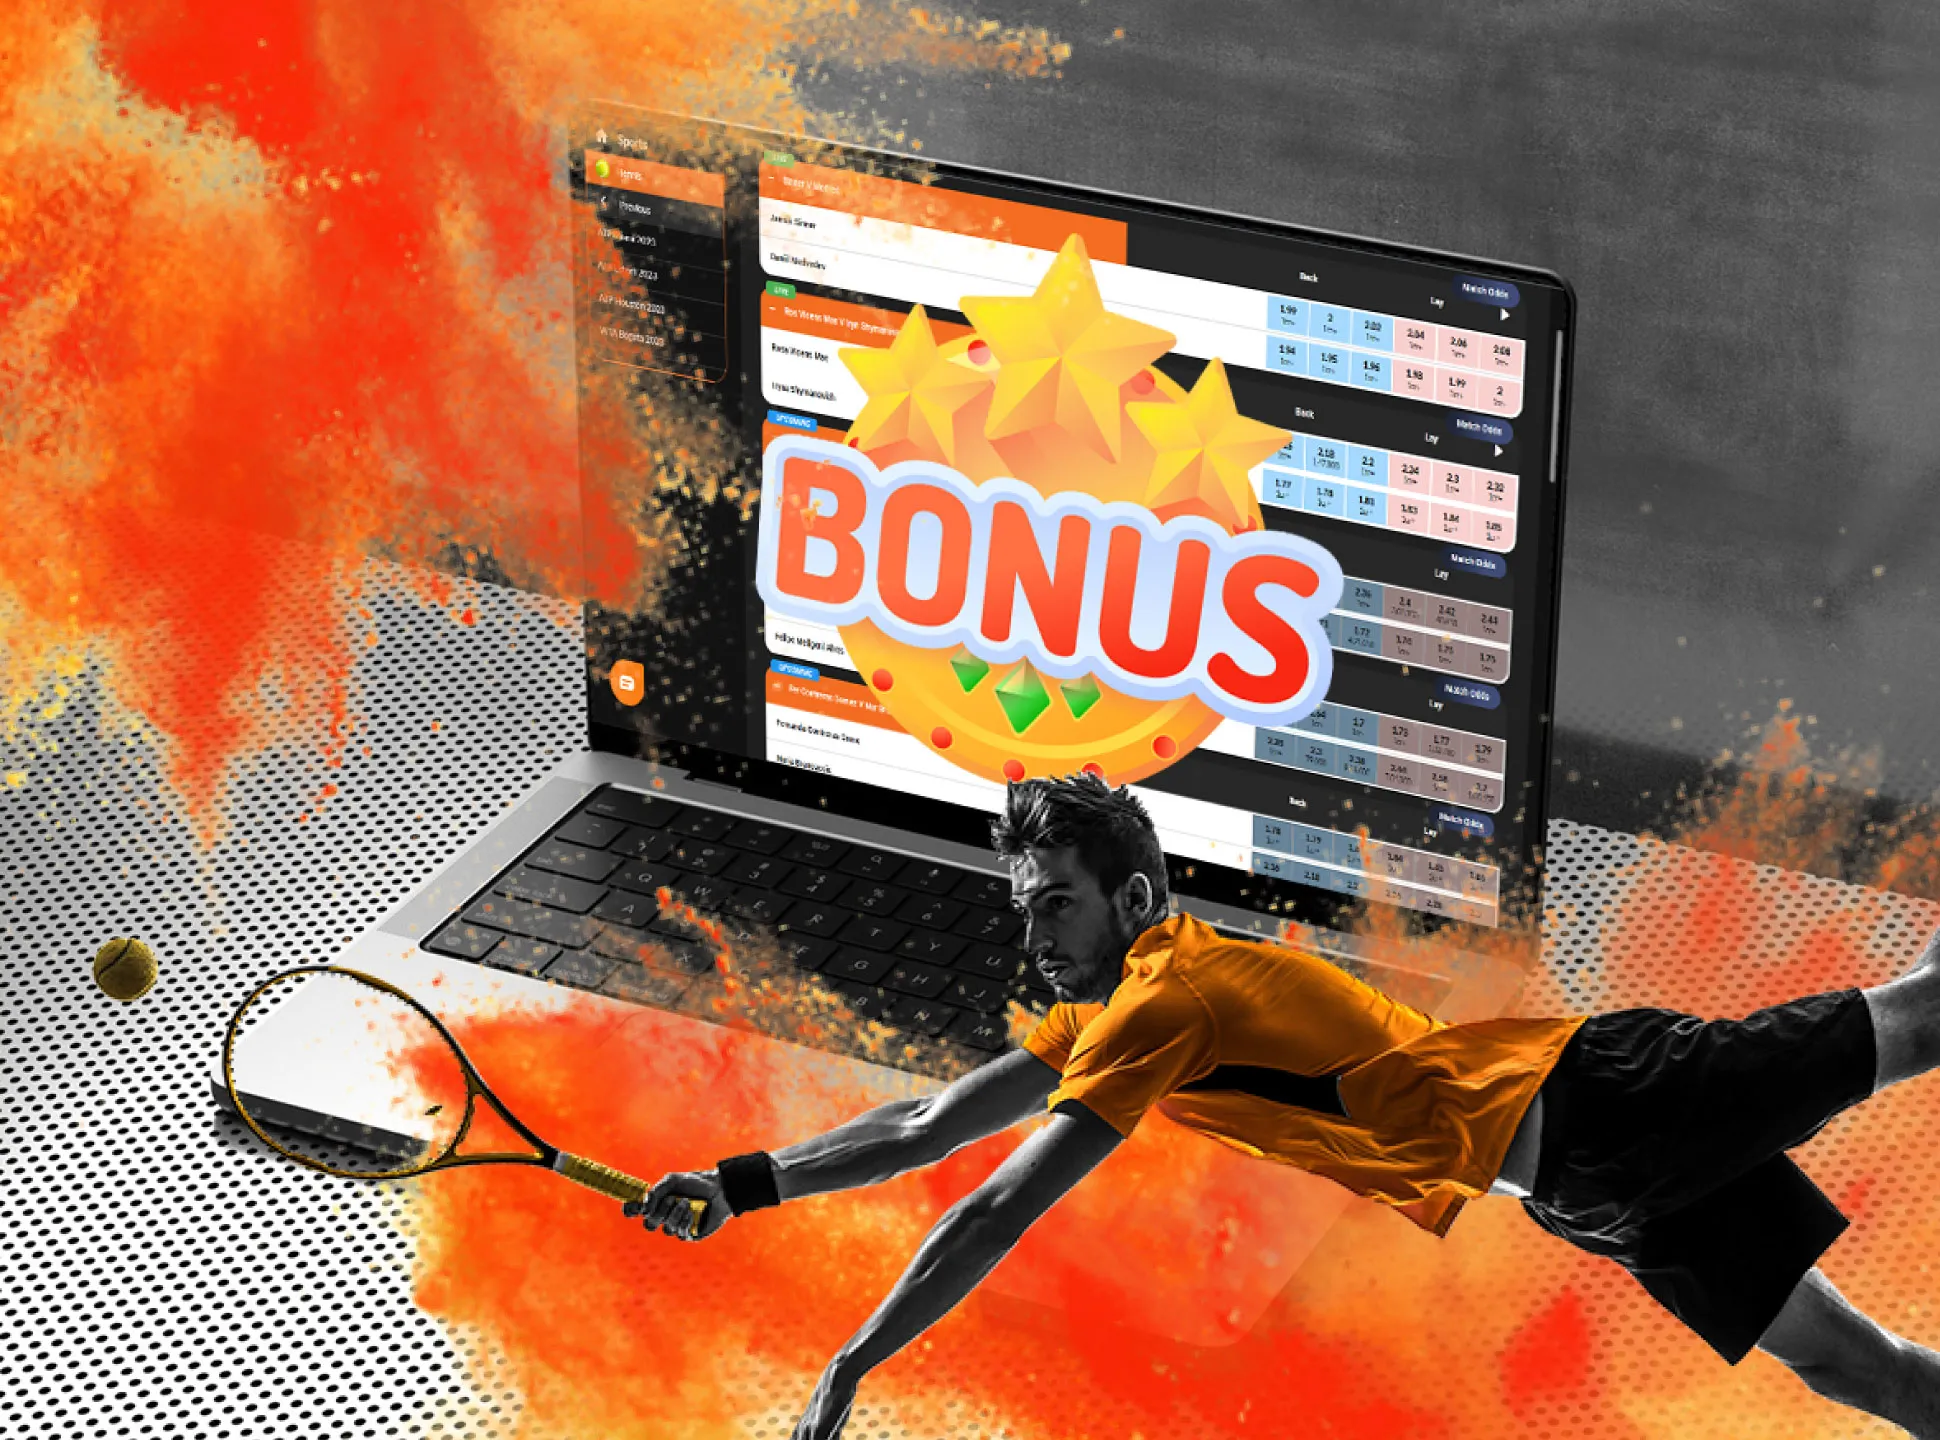 Fairplay offers a 300% welcome bonus which you can spend on tennis betting.